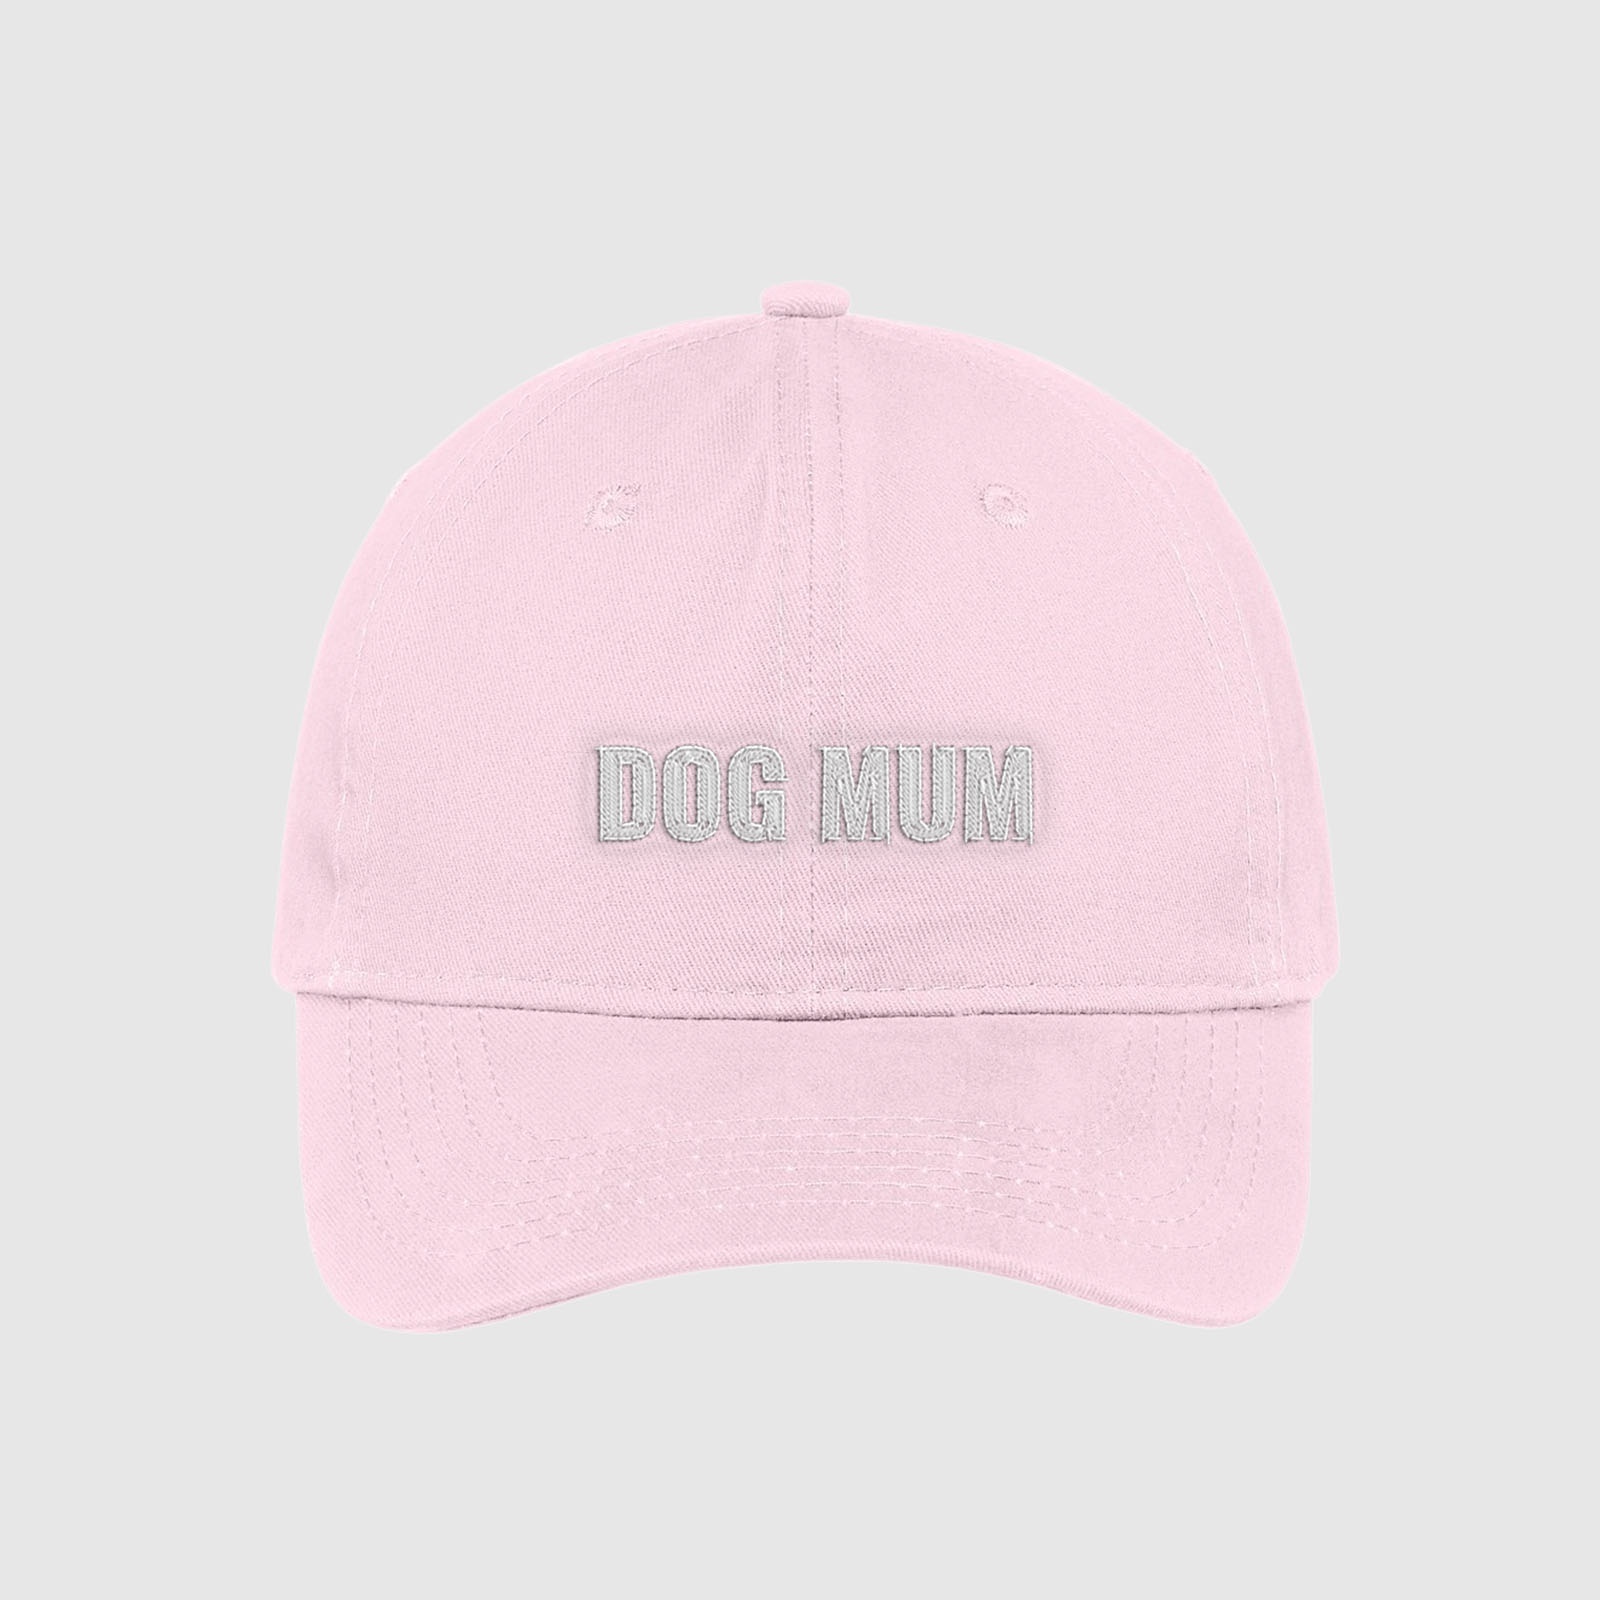 Blush pink Dog Mum Hat embroidered with white text.